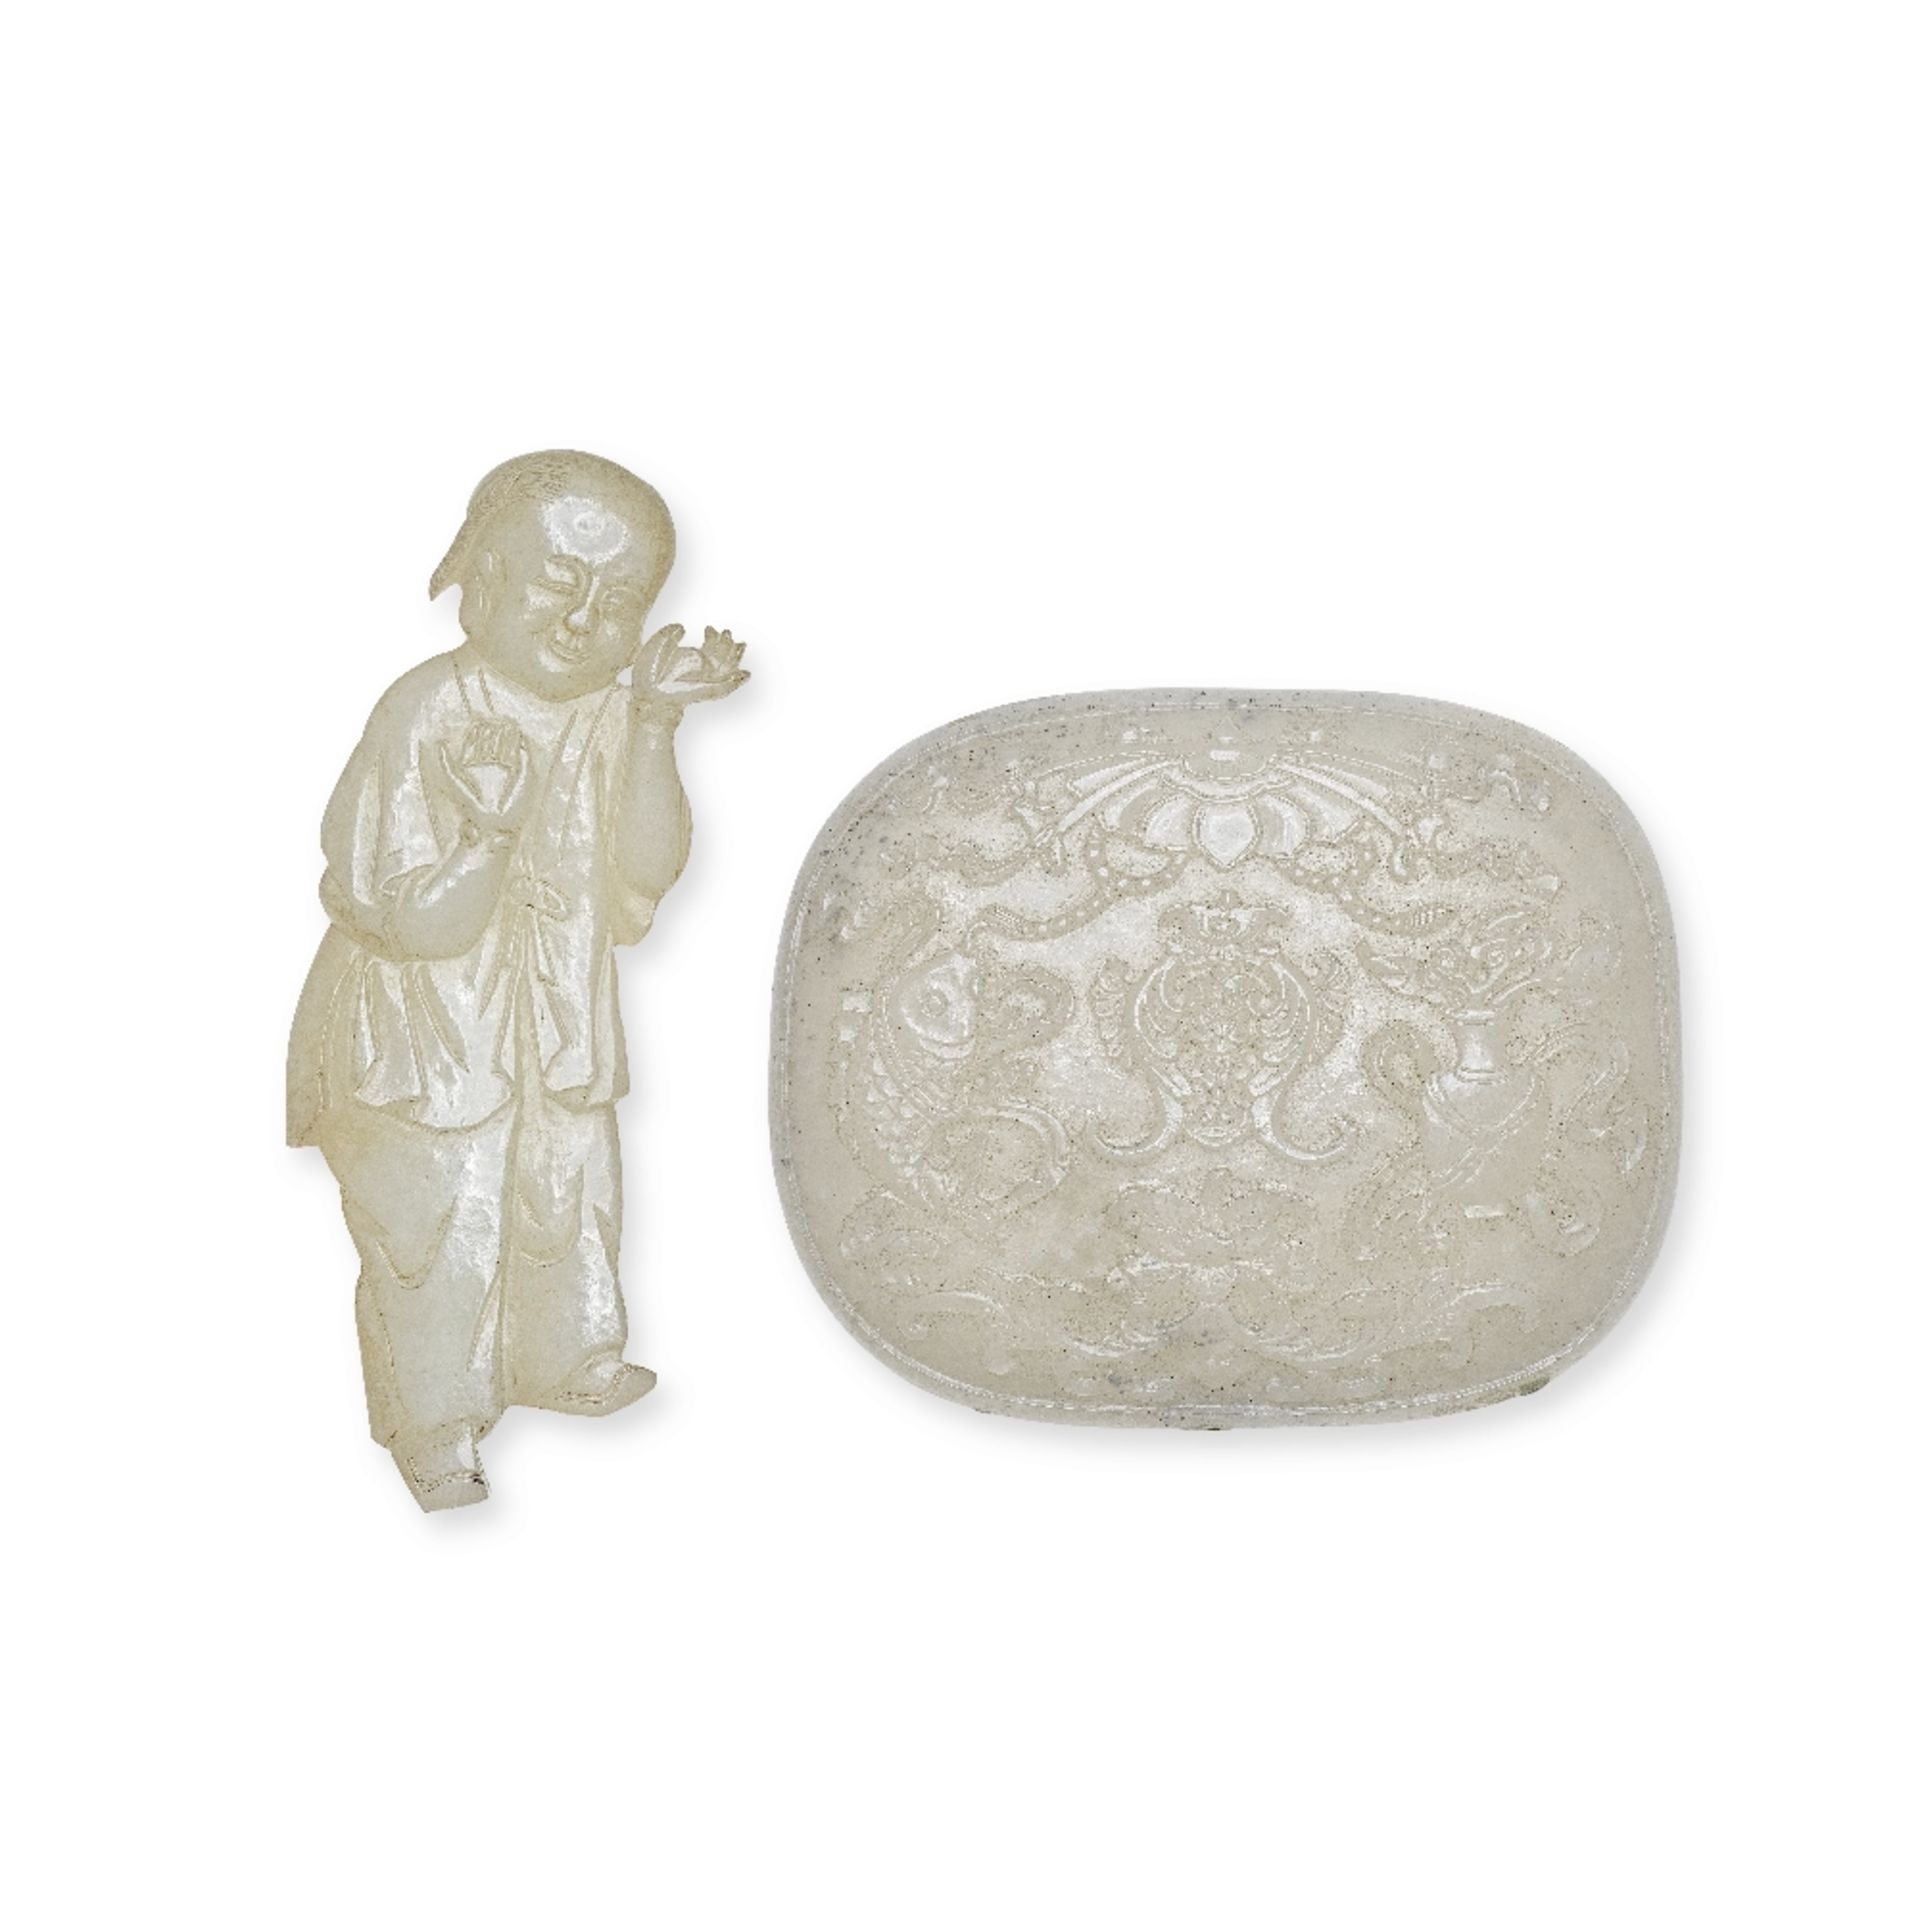 A PALE CELADON JADE 'BOY' PLAQUE AND AN OVAL 'BUDDHIST EMBLEMS' PLAQUE Qing Dynasty (2)